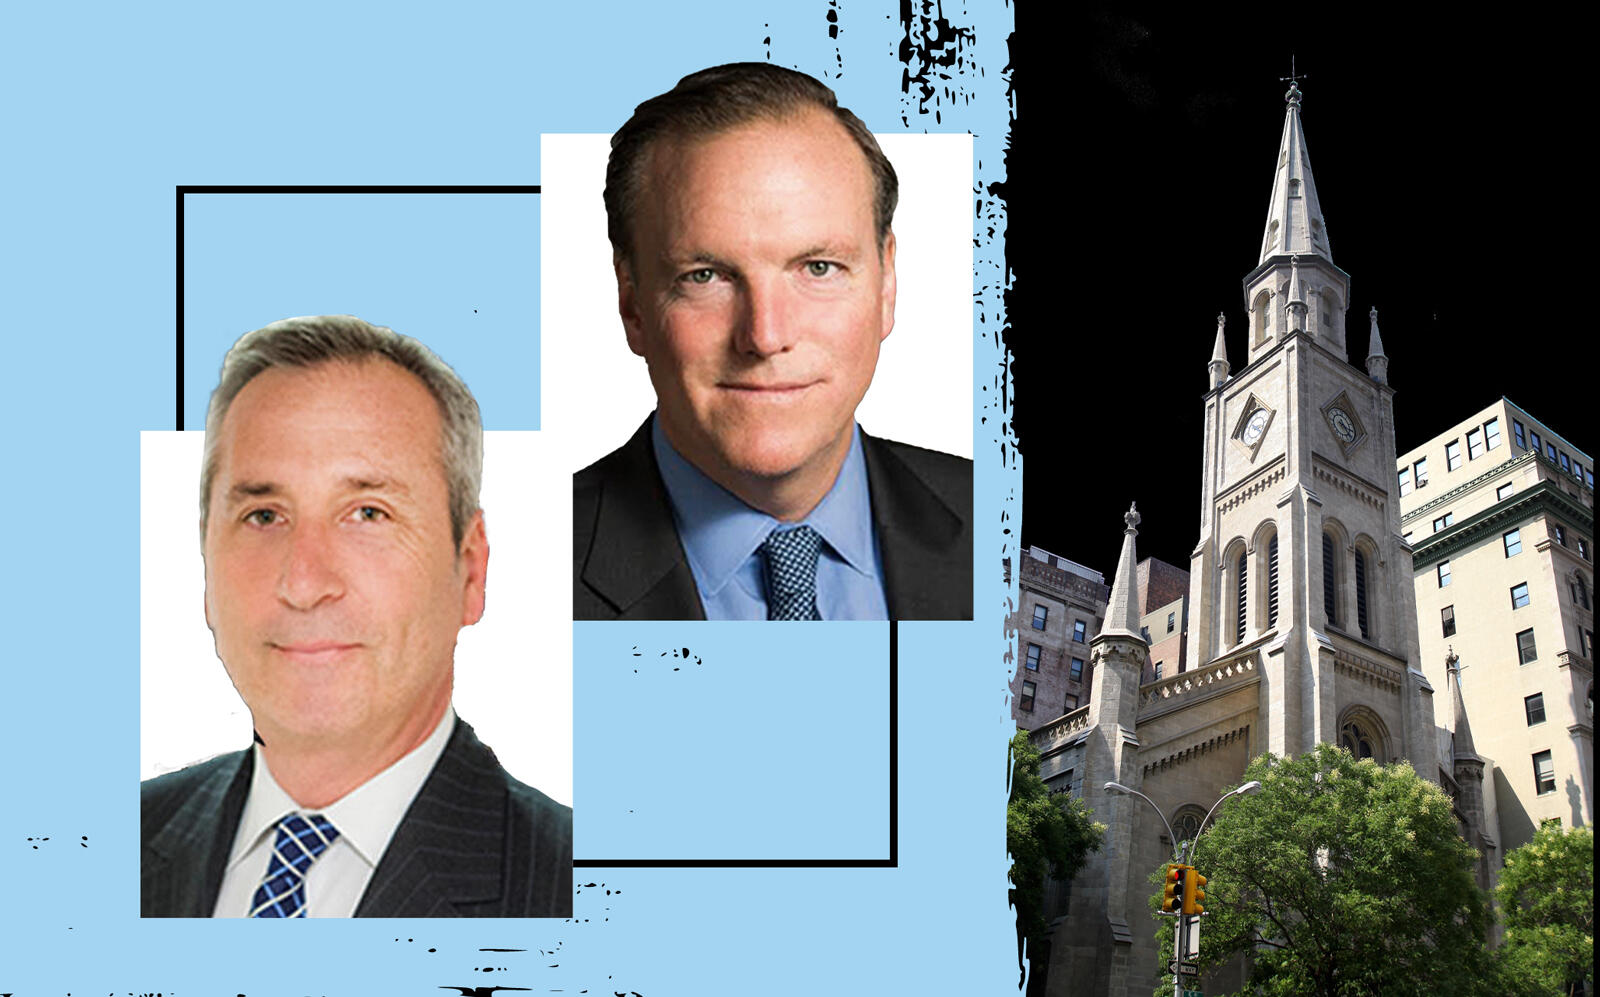 Vanbarton Group’s Gary M. Tischler and Richard Coles with Marble Collegiate Church at 1 West 29th Street (Getty)